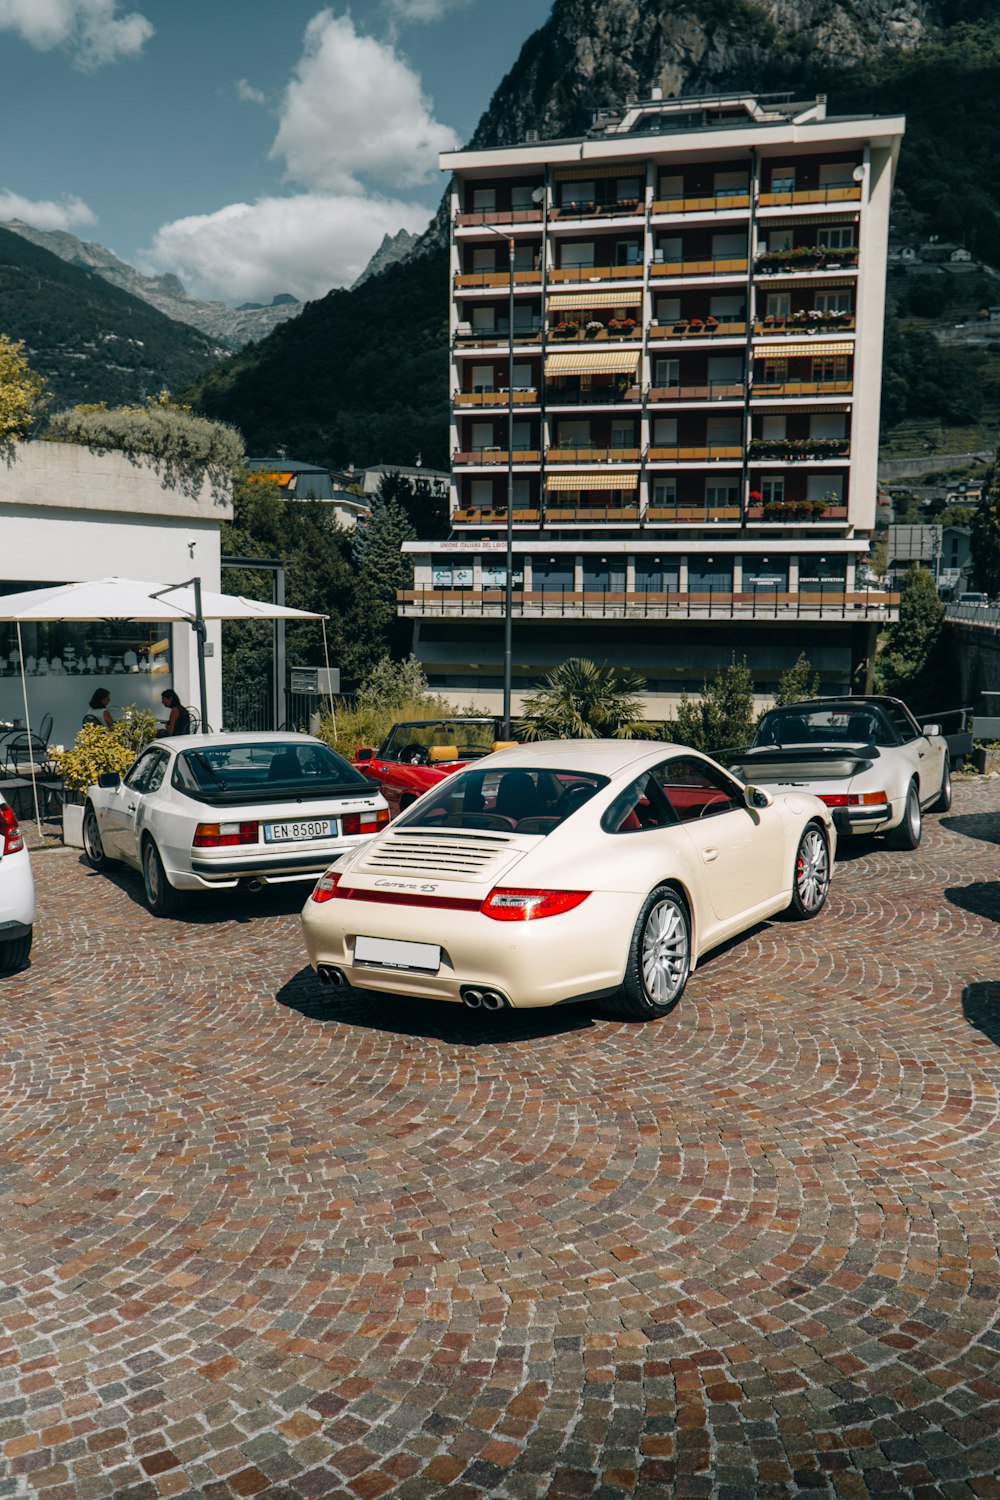 cars parked in front of a building